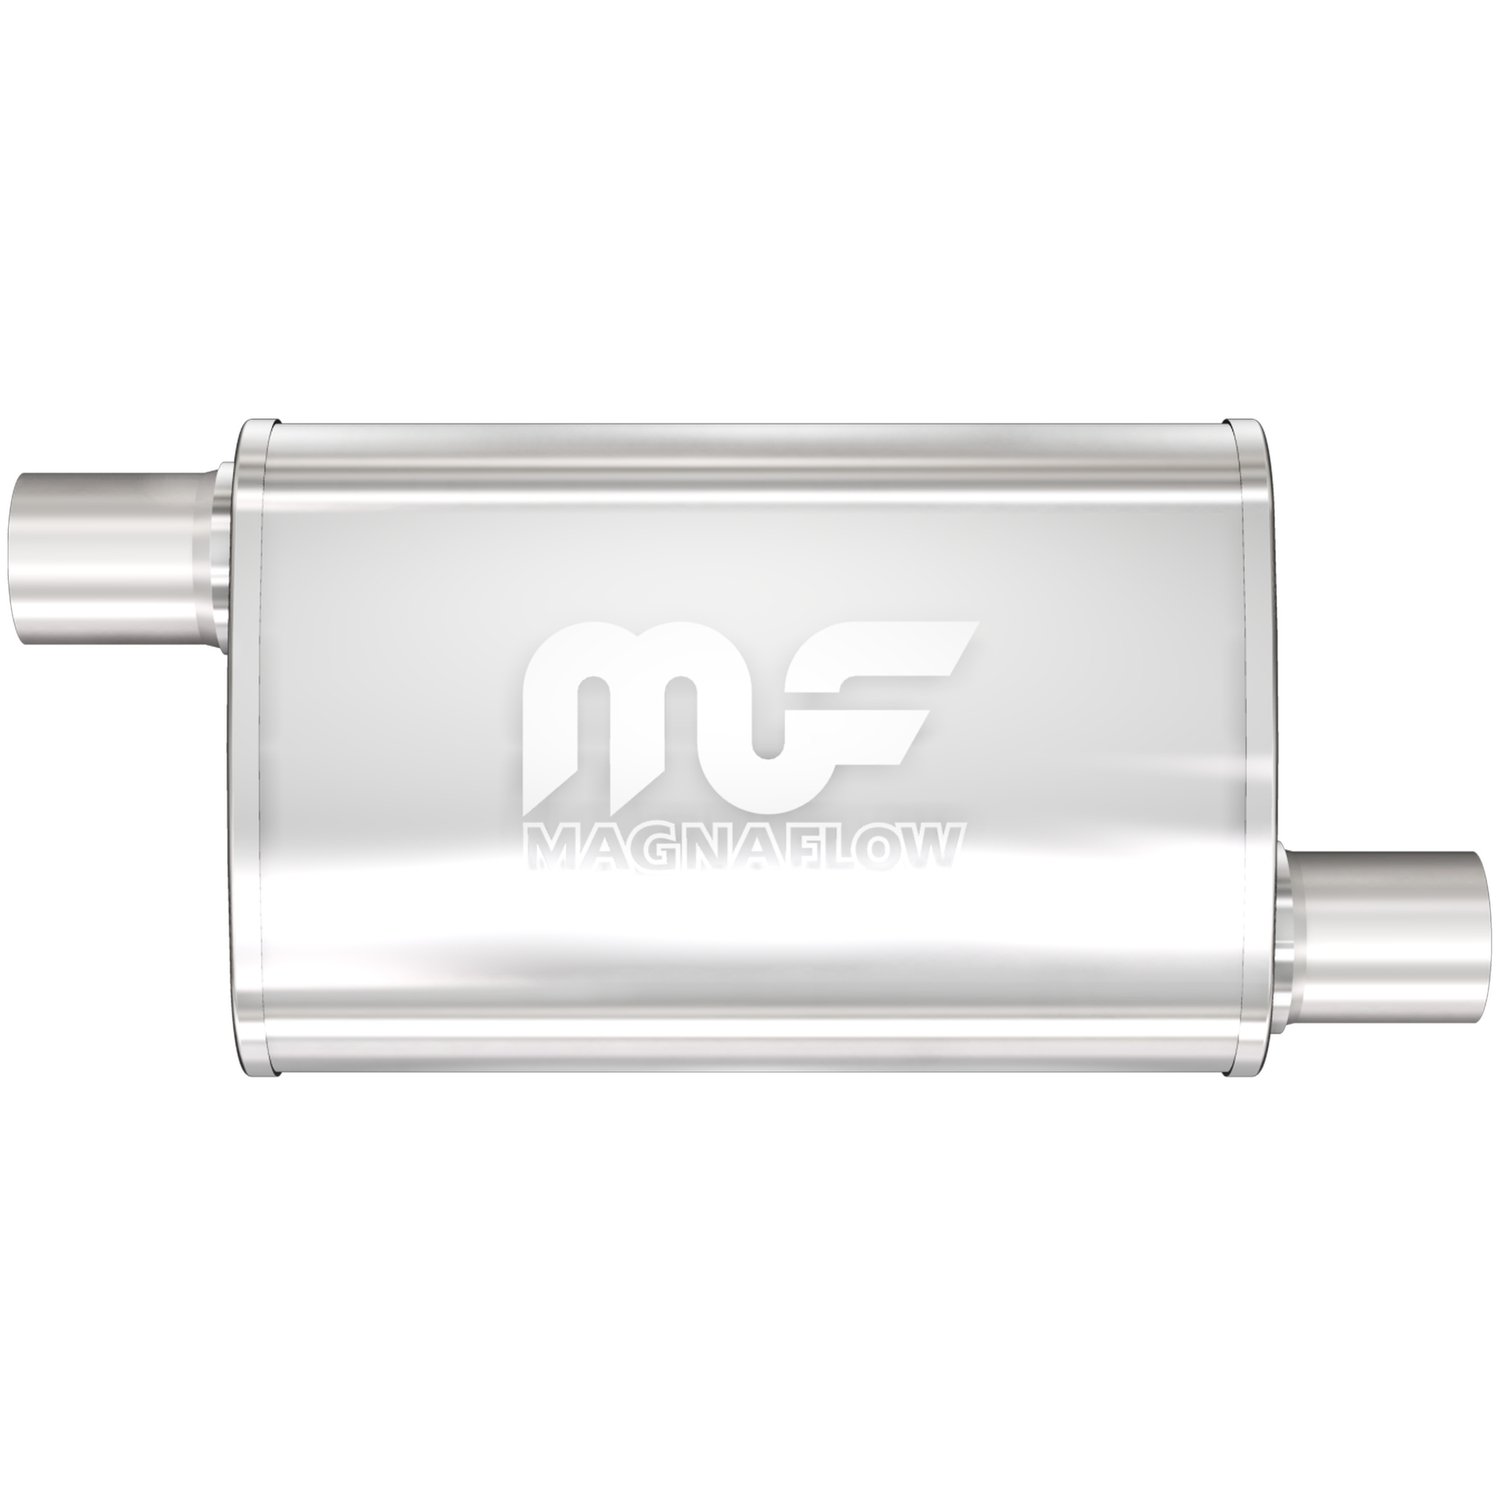 4" x 9" Oval Muffler Offset In/Offset Out: 2.5"/2.5" Body Length: 18" Overall Length: 24" Core Size: 2.5" Satin Finish